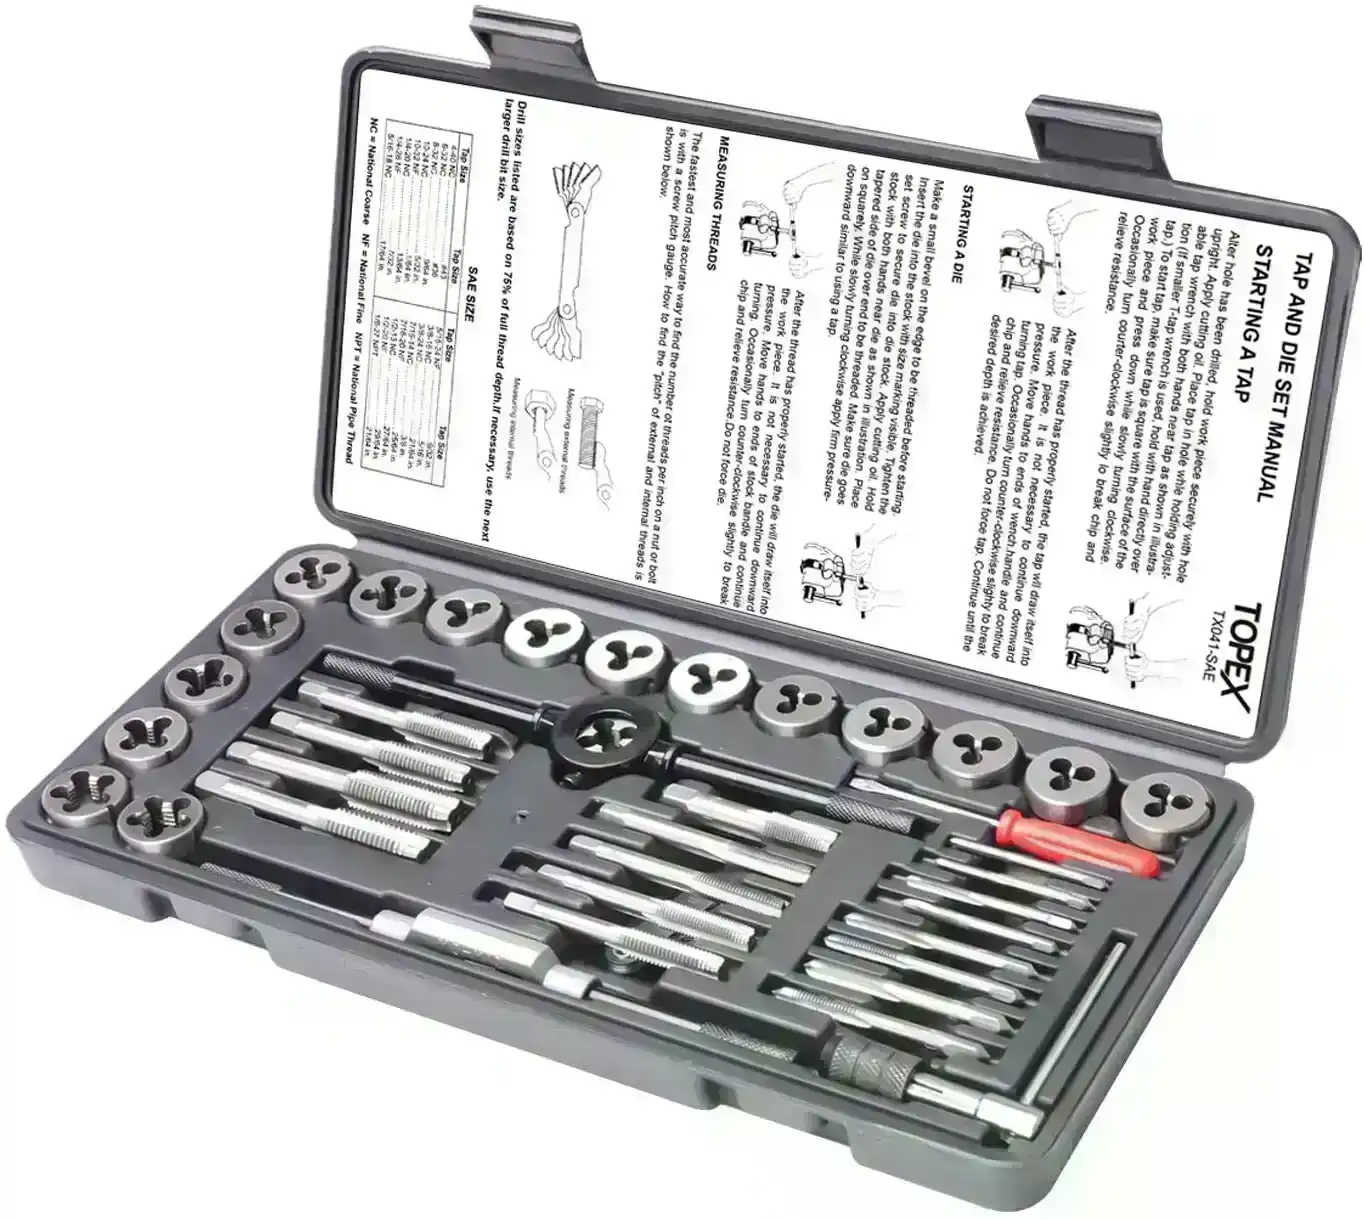 40 PCs Imperial Tap and Die Set Screw Thread Drill Kit Pitch Gauge M3-M12